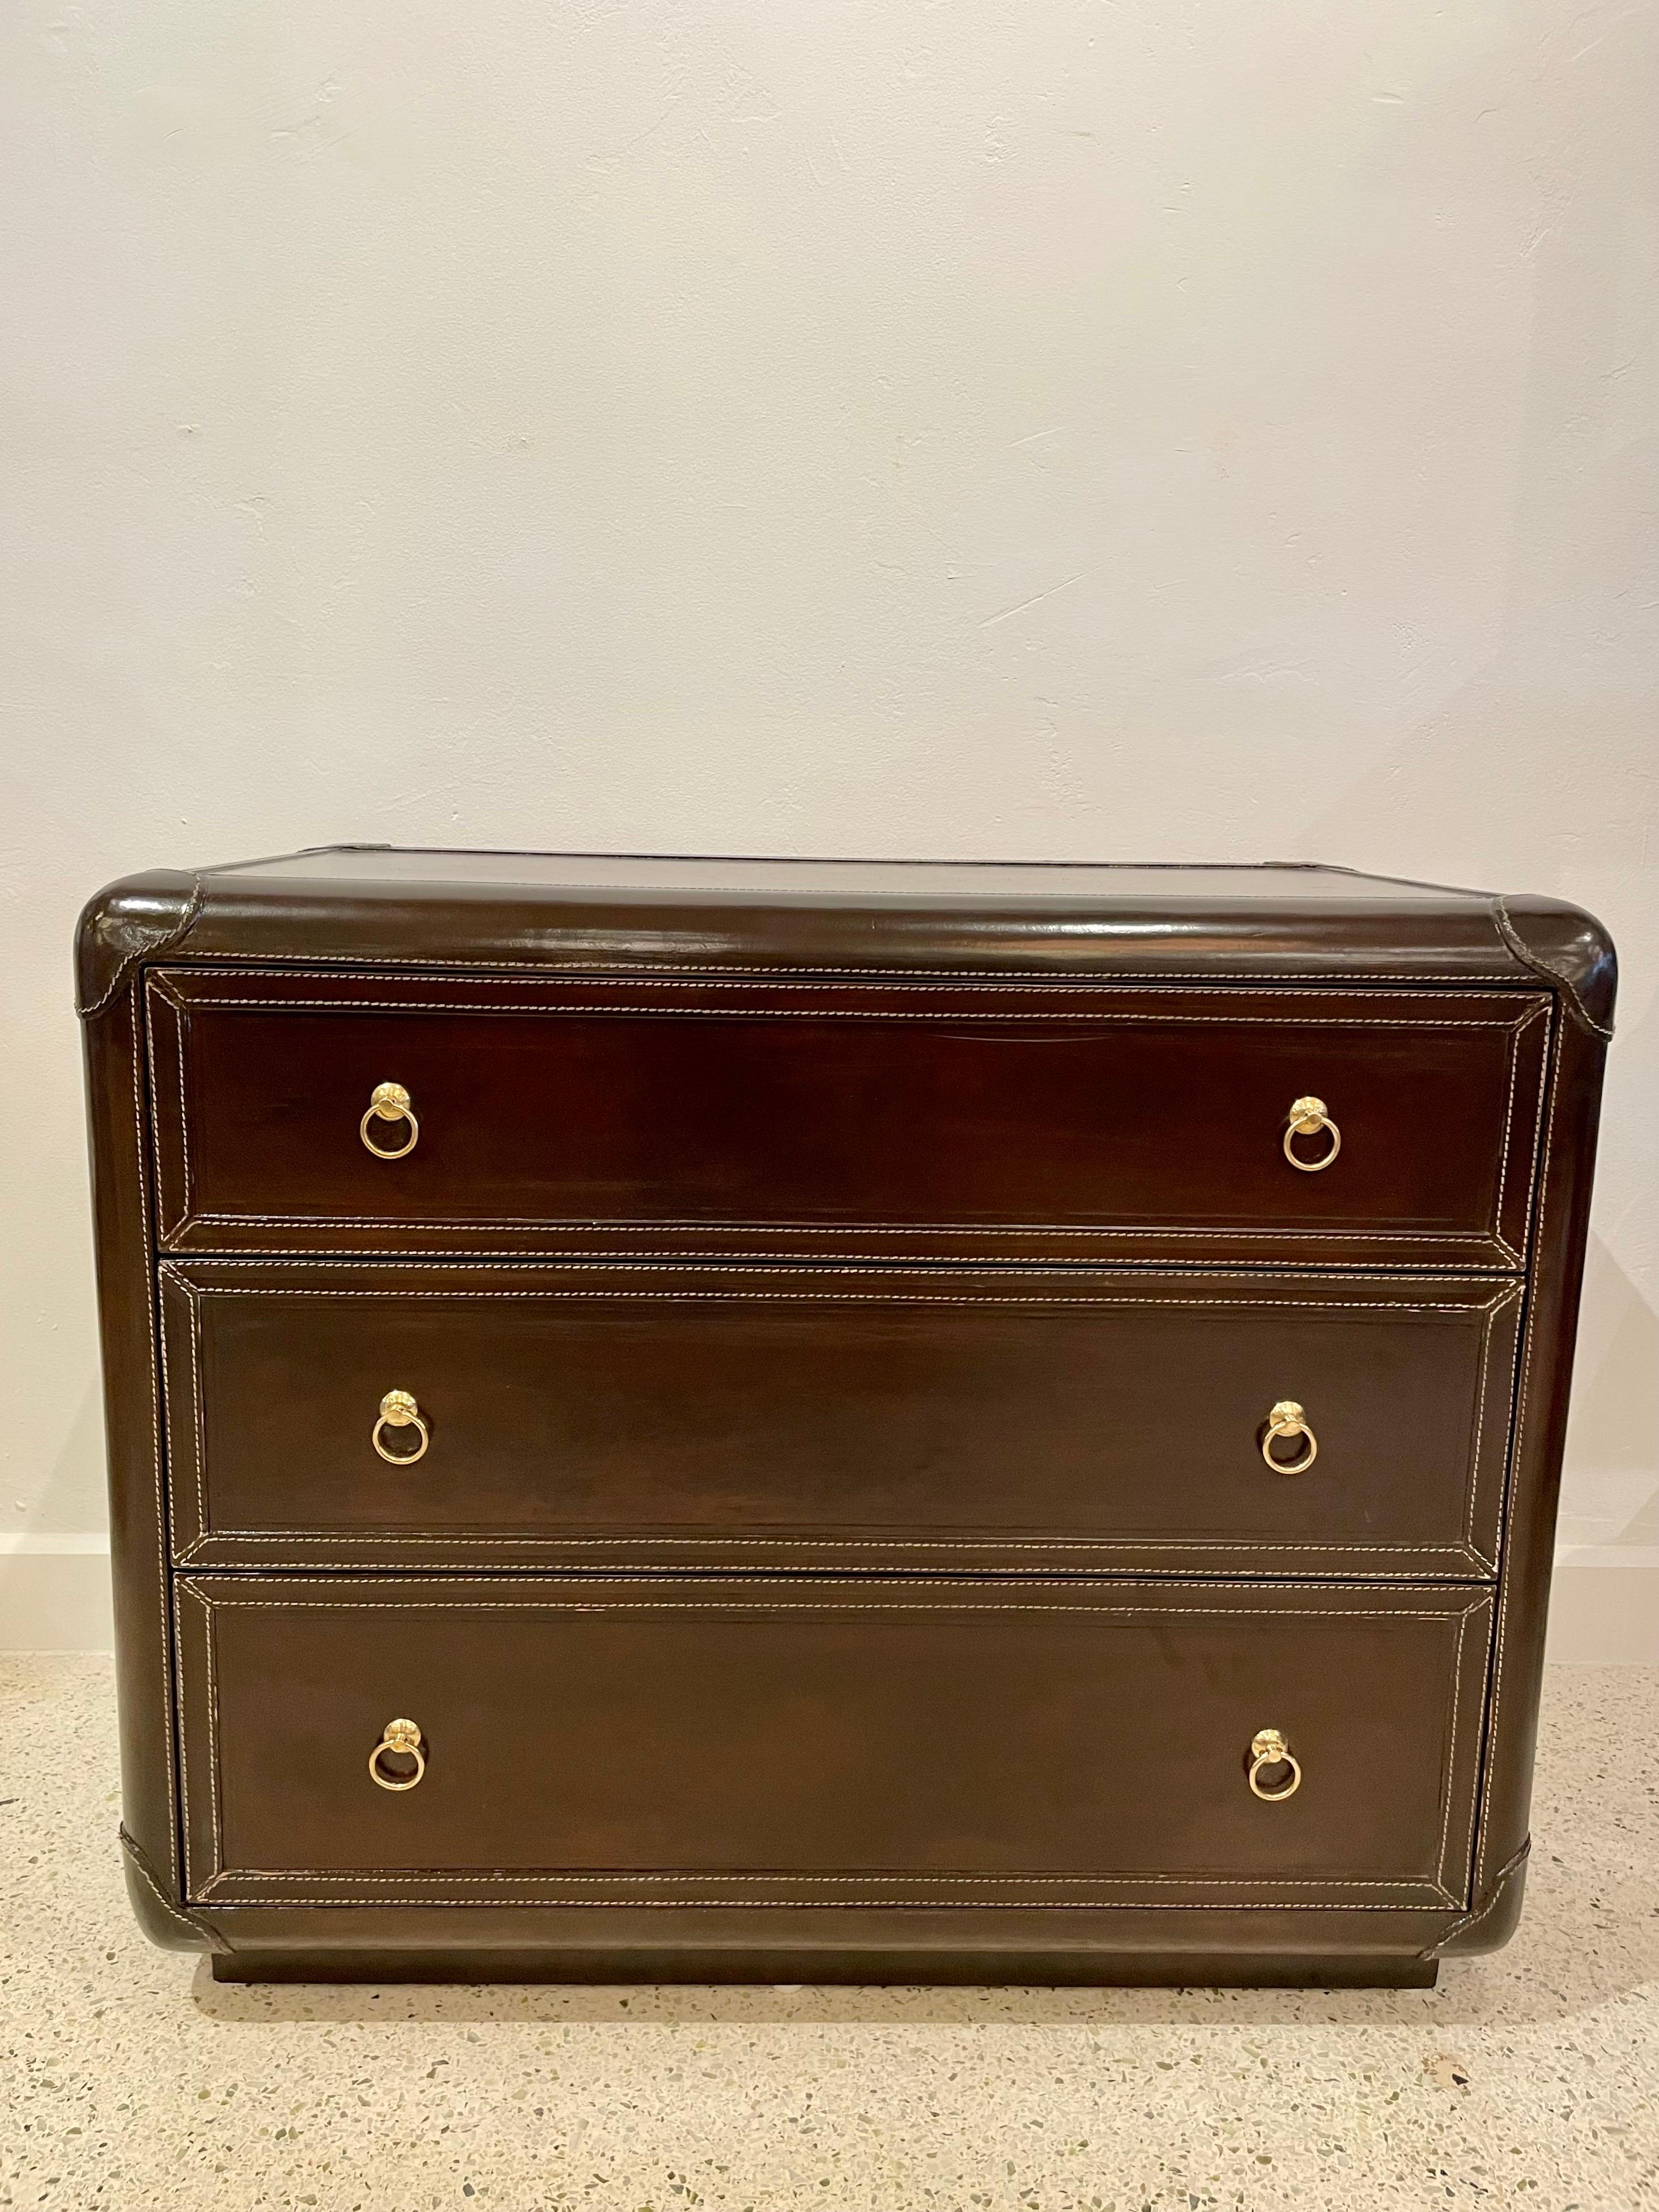 This all leather clad cabinet with exquisite stitching throughout has 3-ample paper-lined drawers and original brass pulls. The dark brown coloring of the leather and the white stitch make this piece VERY special. This is a very masculine, trunk